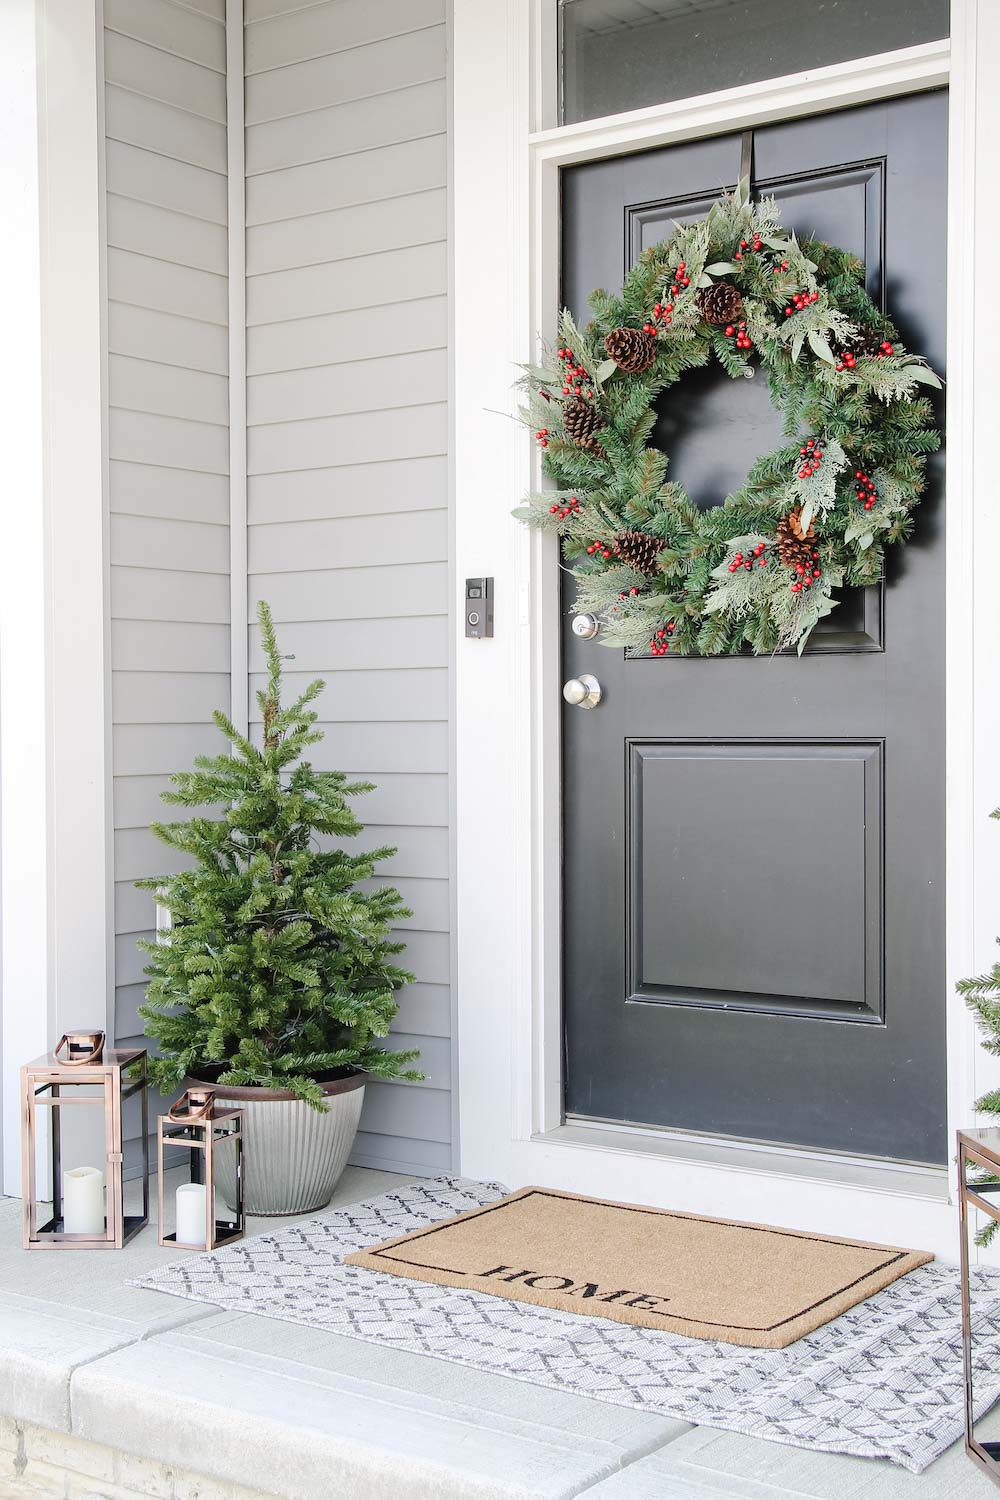 A front porch styled for the holidays with door wreath, porch trees and lanterns